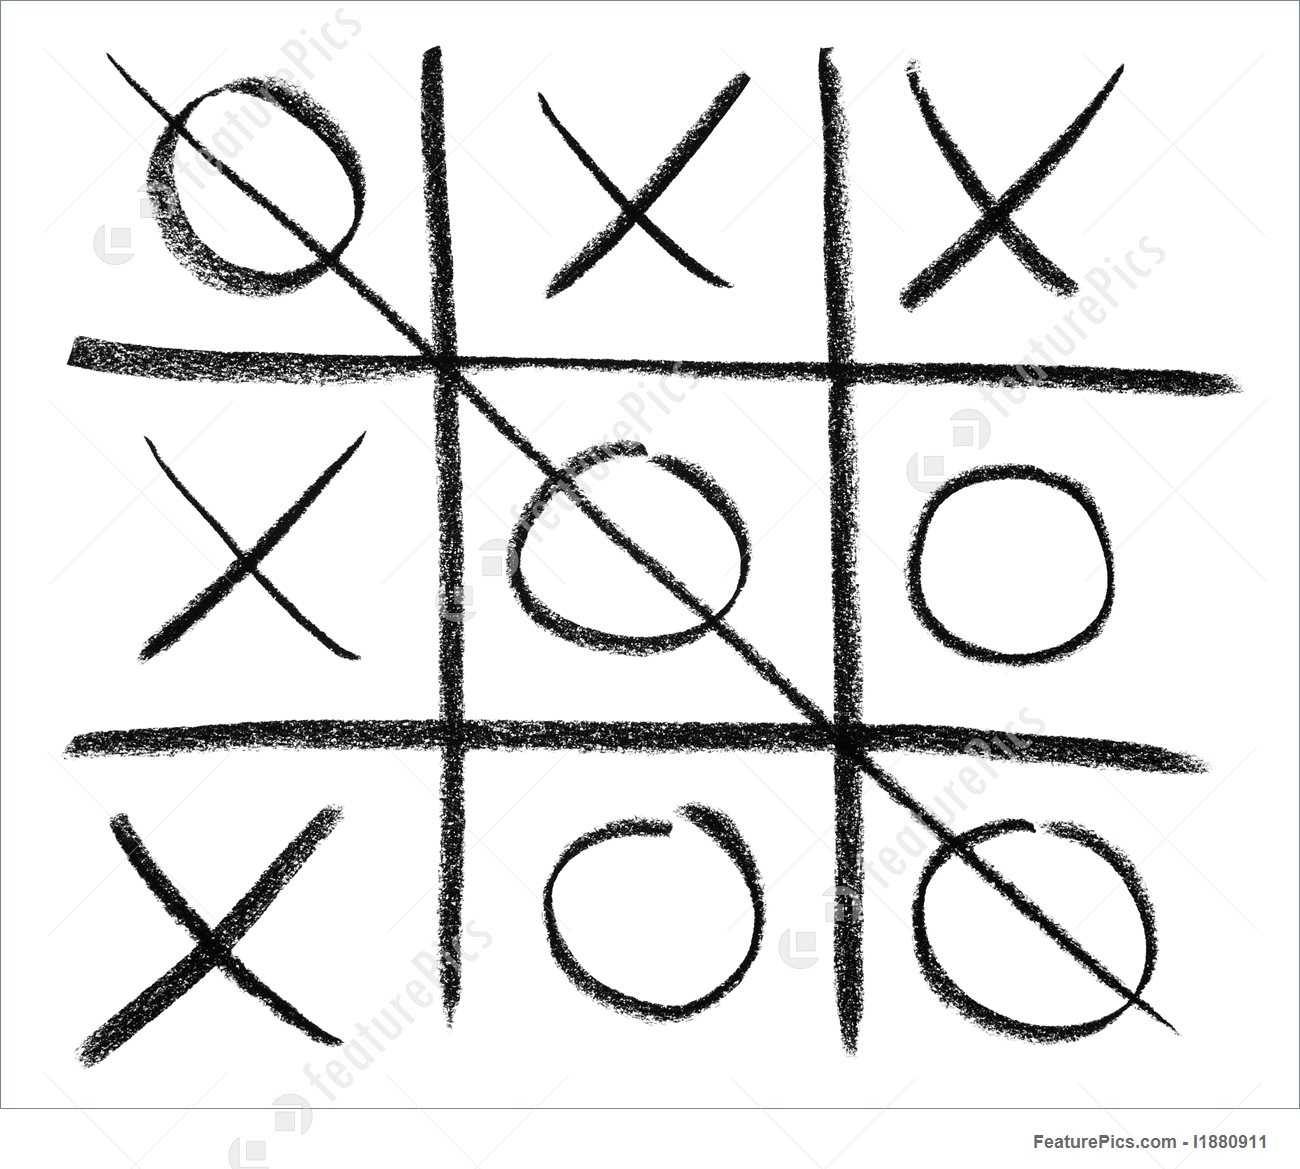 67A Tic Tac Toe Template | Wiring Library With Regard To Tic Tac Toe Template Word